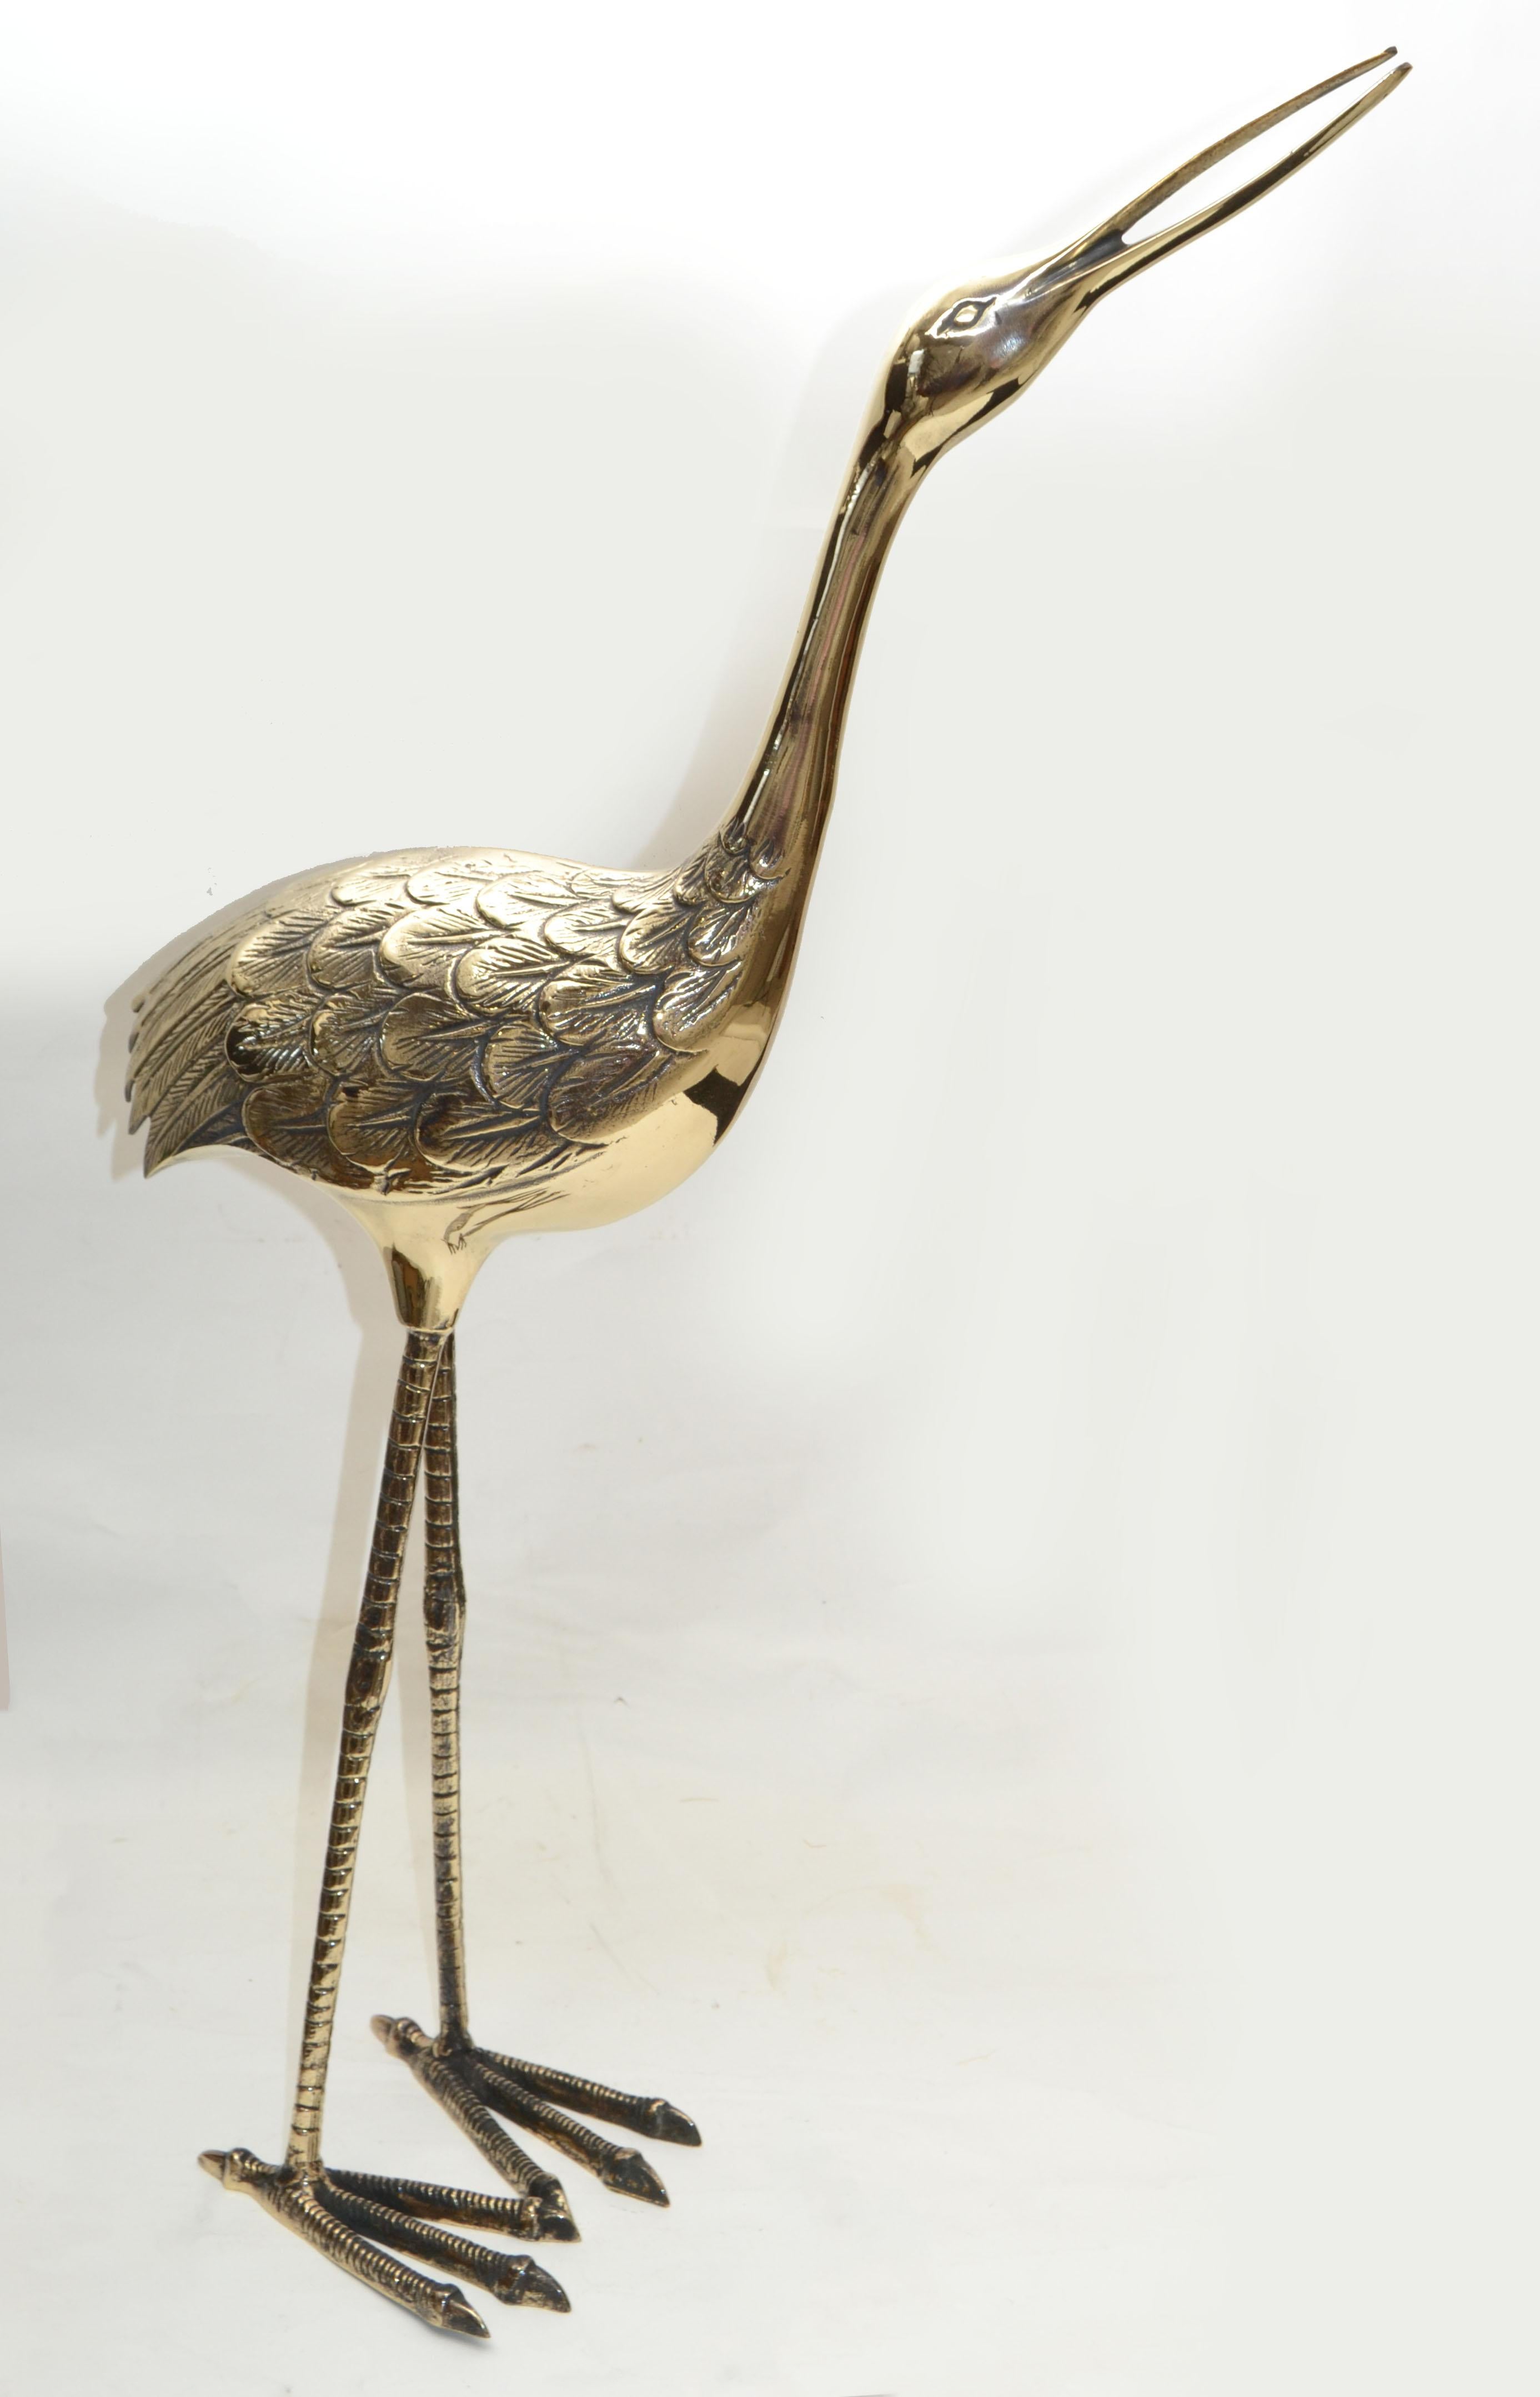 Bronze Crane Life-Size Animal Sculpture Handcrafted Mid-Century Modern, 1970 For Sale 9